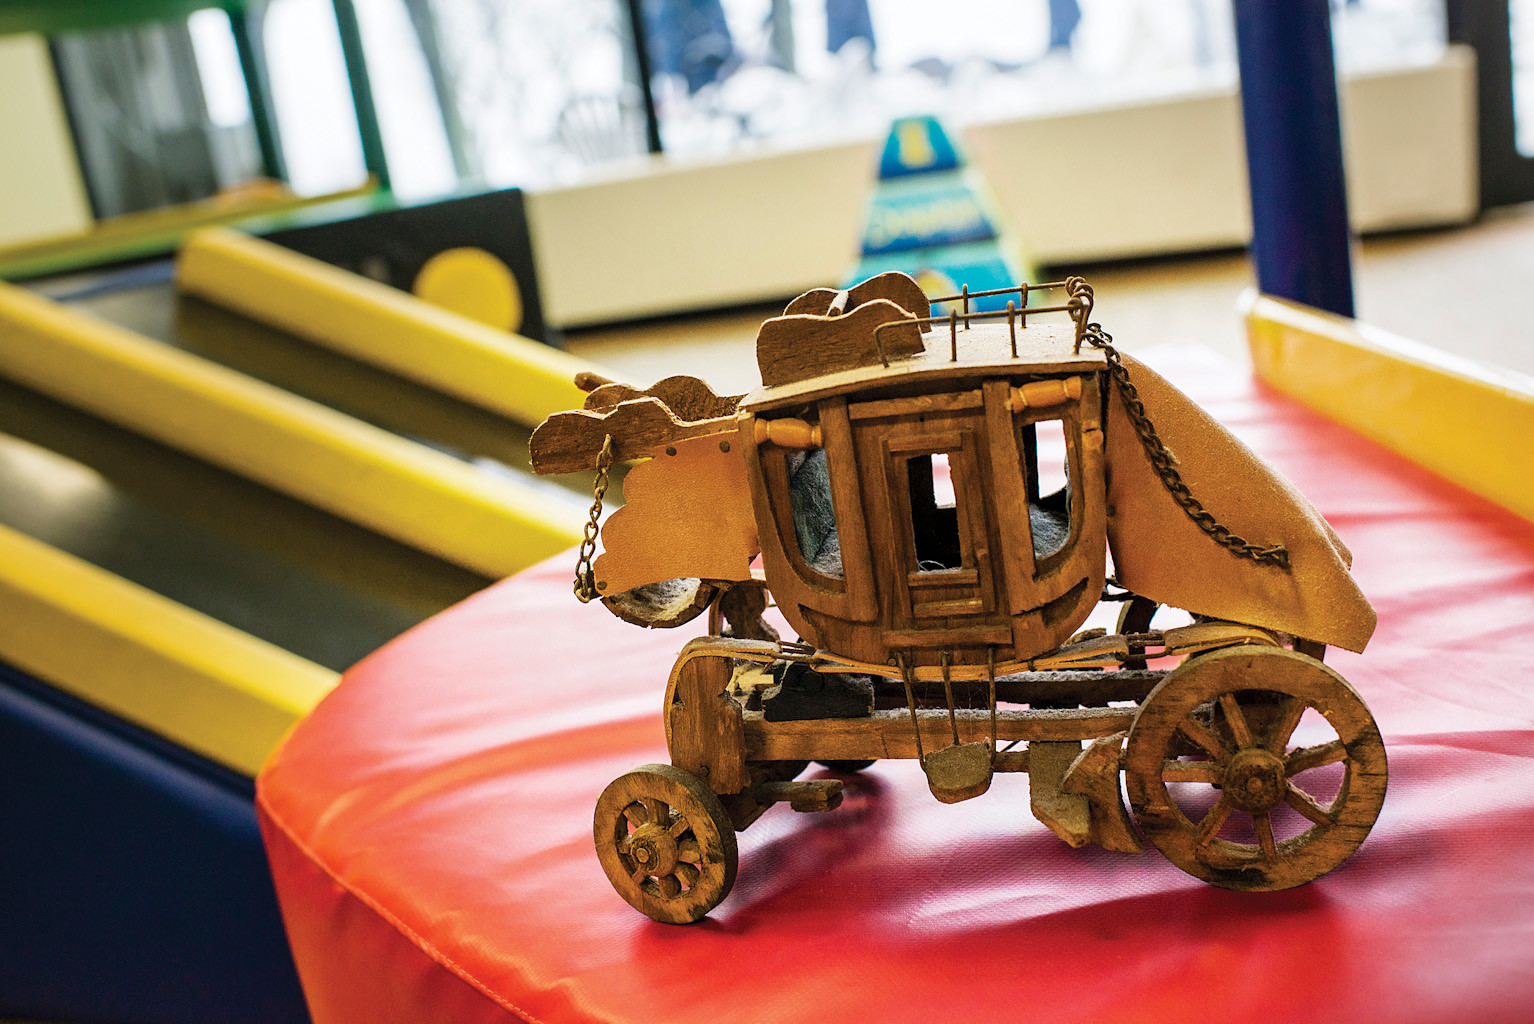 A model wooden carriage.